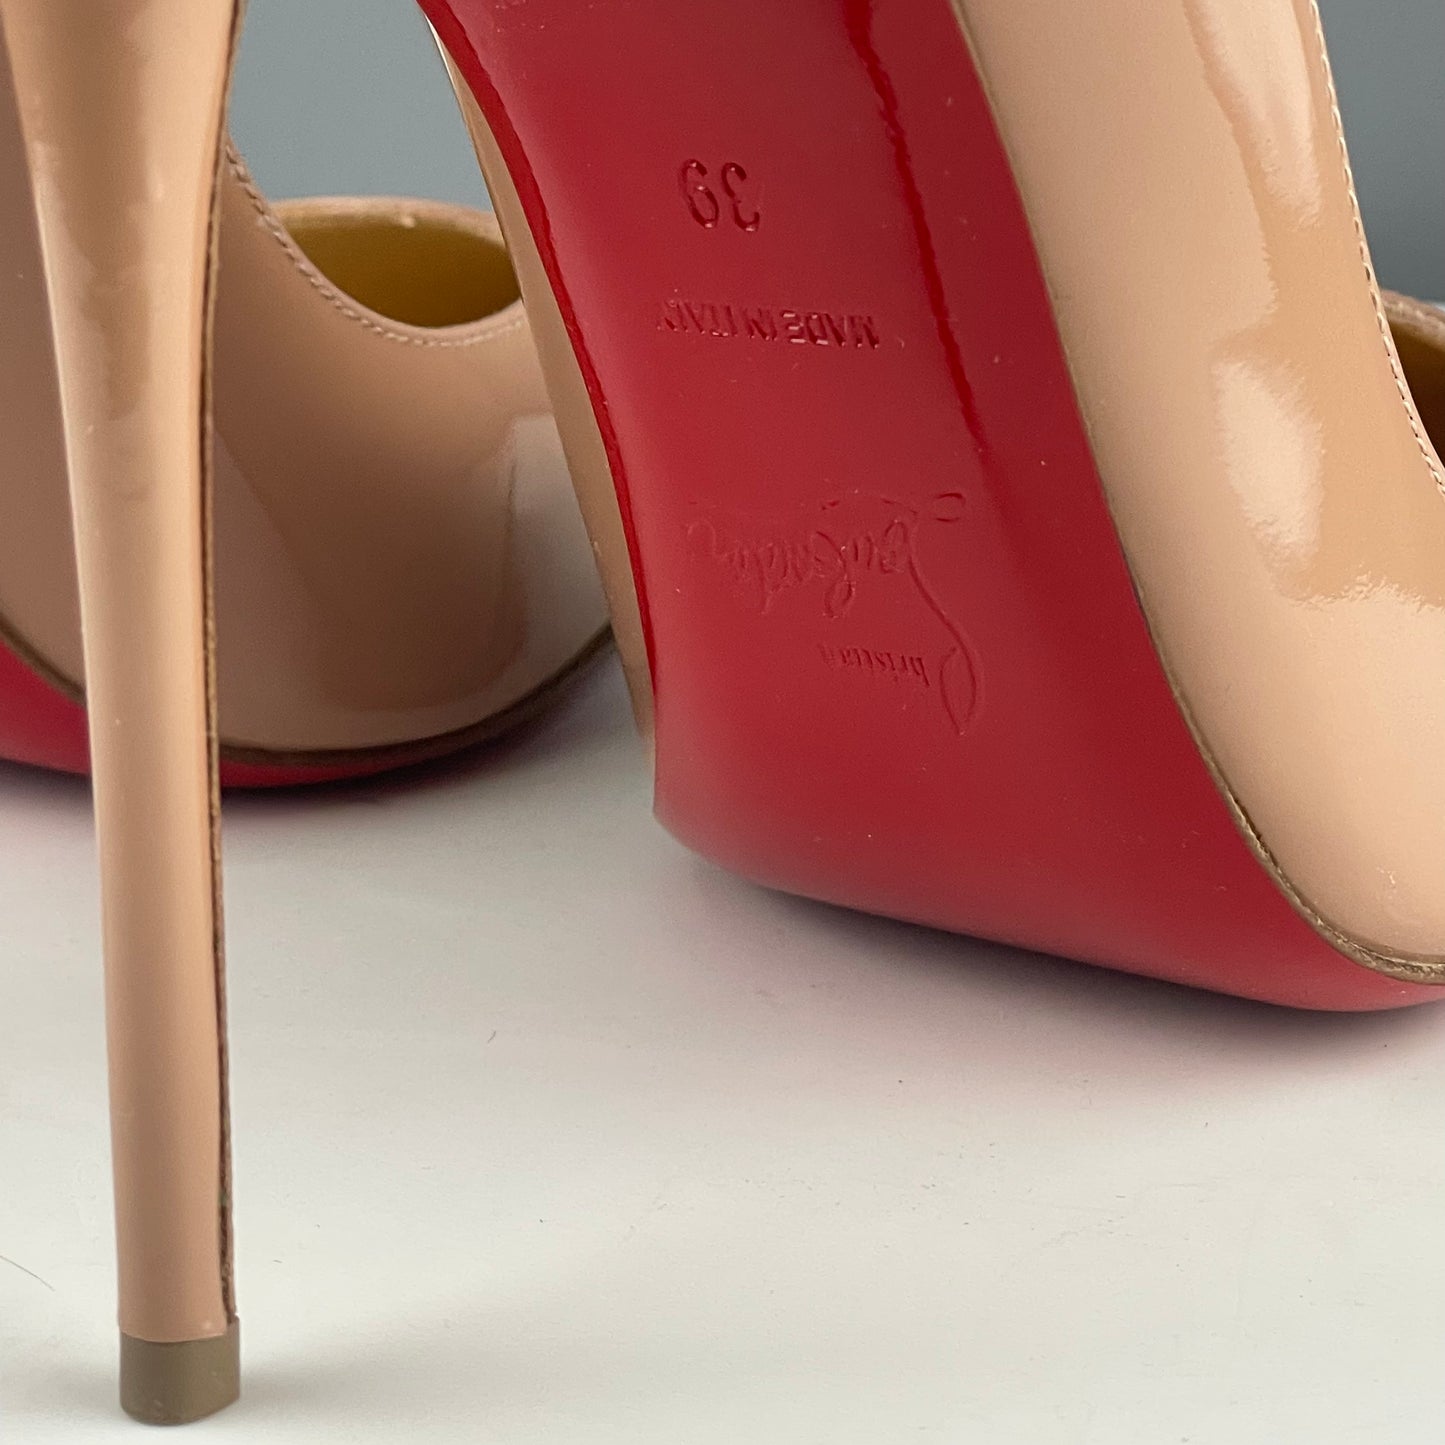 LOUBOUTIN - So Kate 120 nude patent pumps